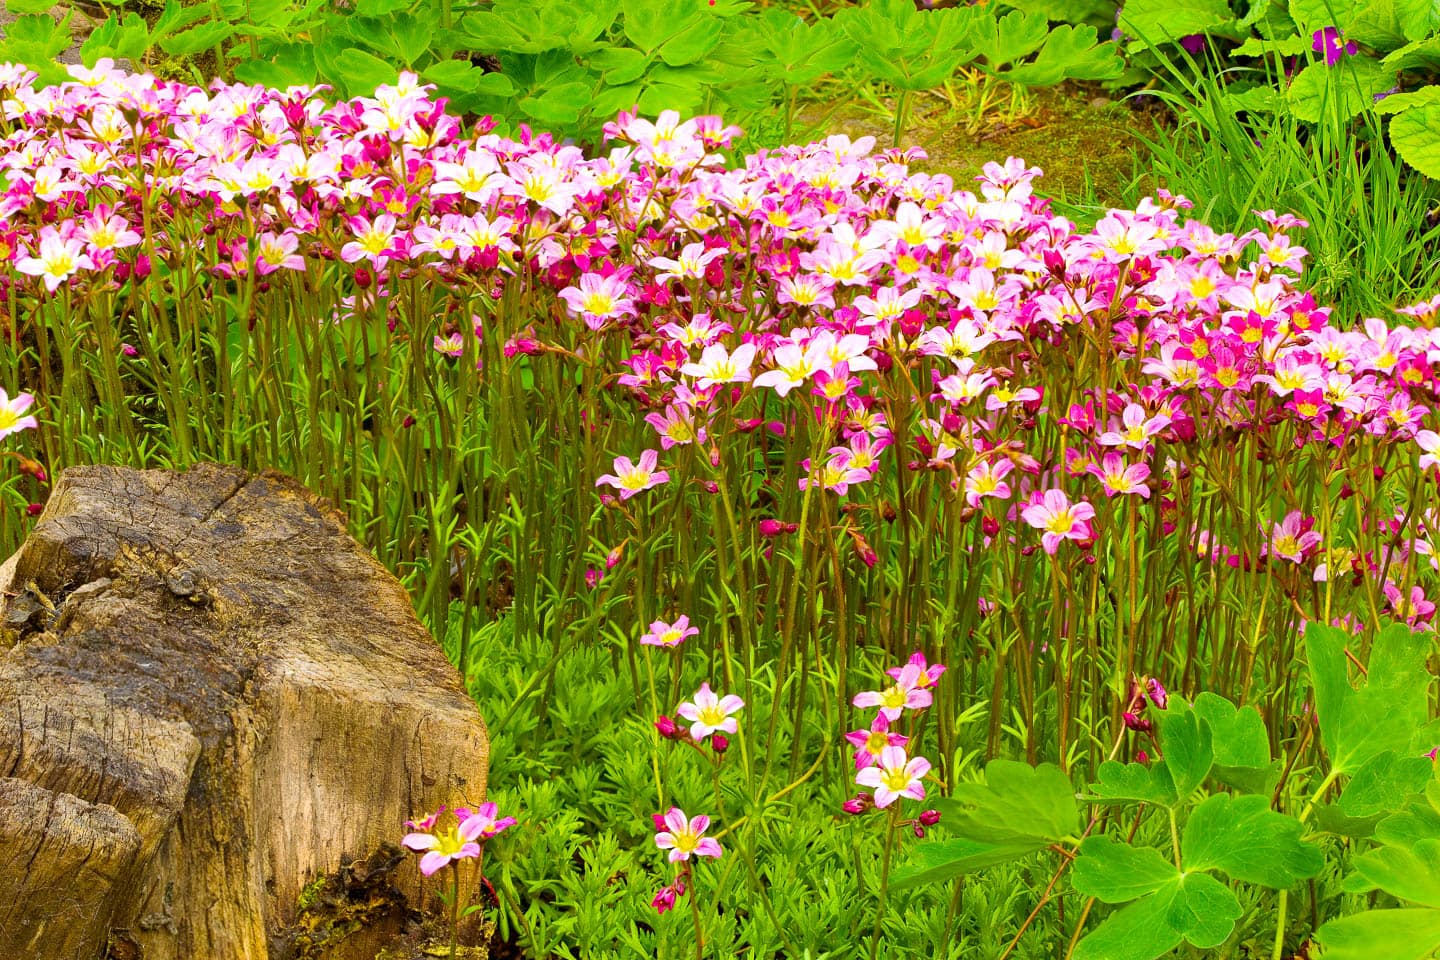 Saxifraga paniculata with pink and white flowers